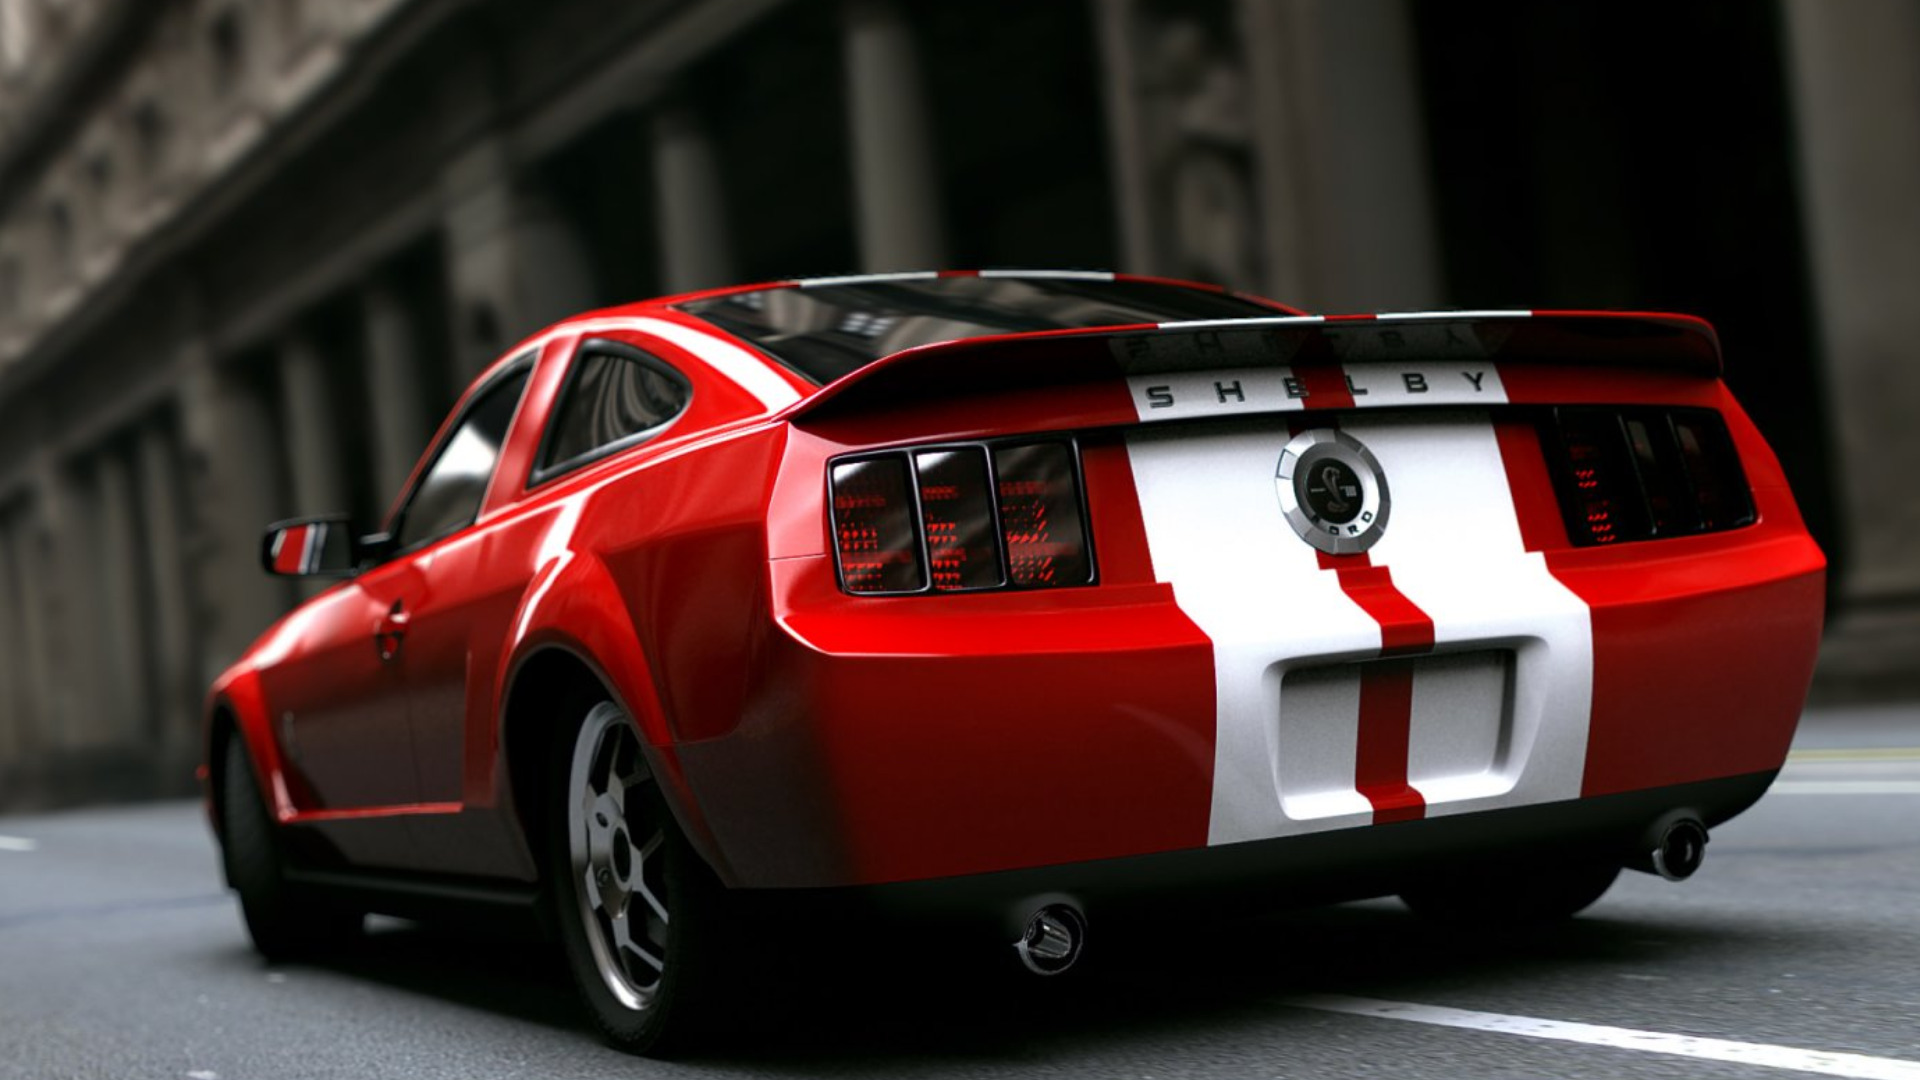 Vehicles Ford Mustang Shelby GT500 1920x1080